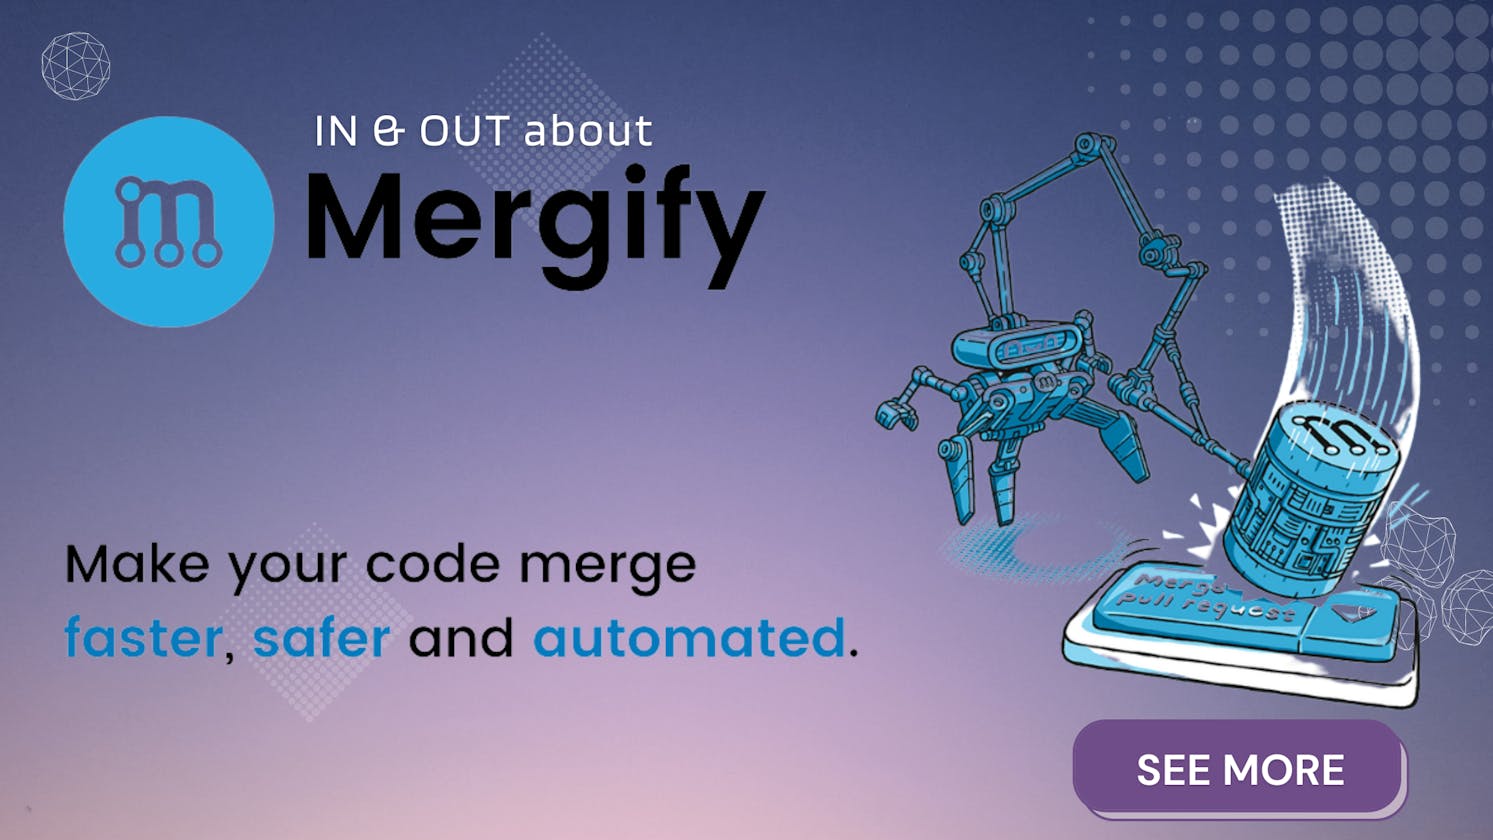 DevOps Tools: In & Out about Mergify